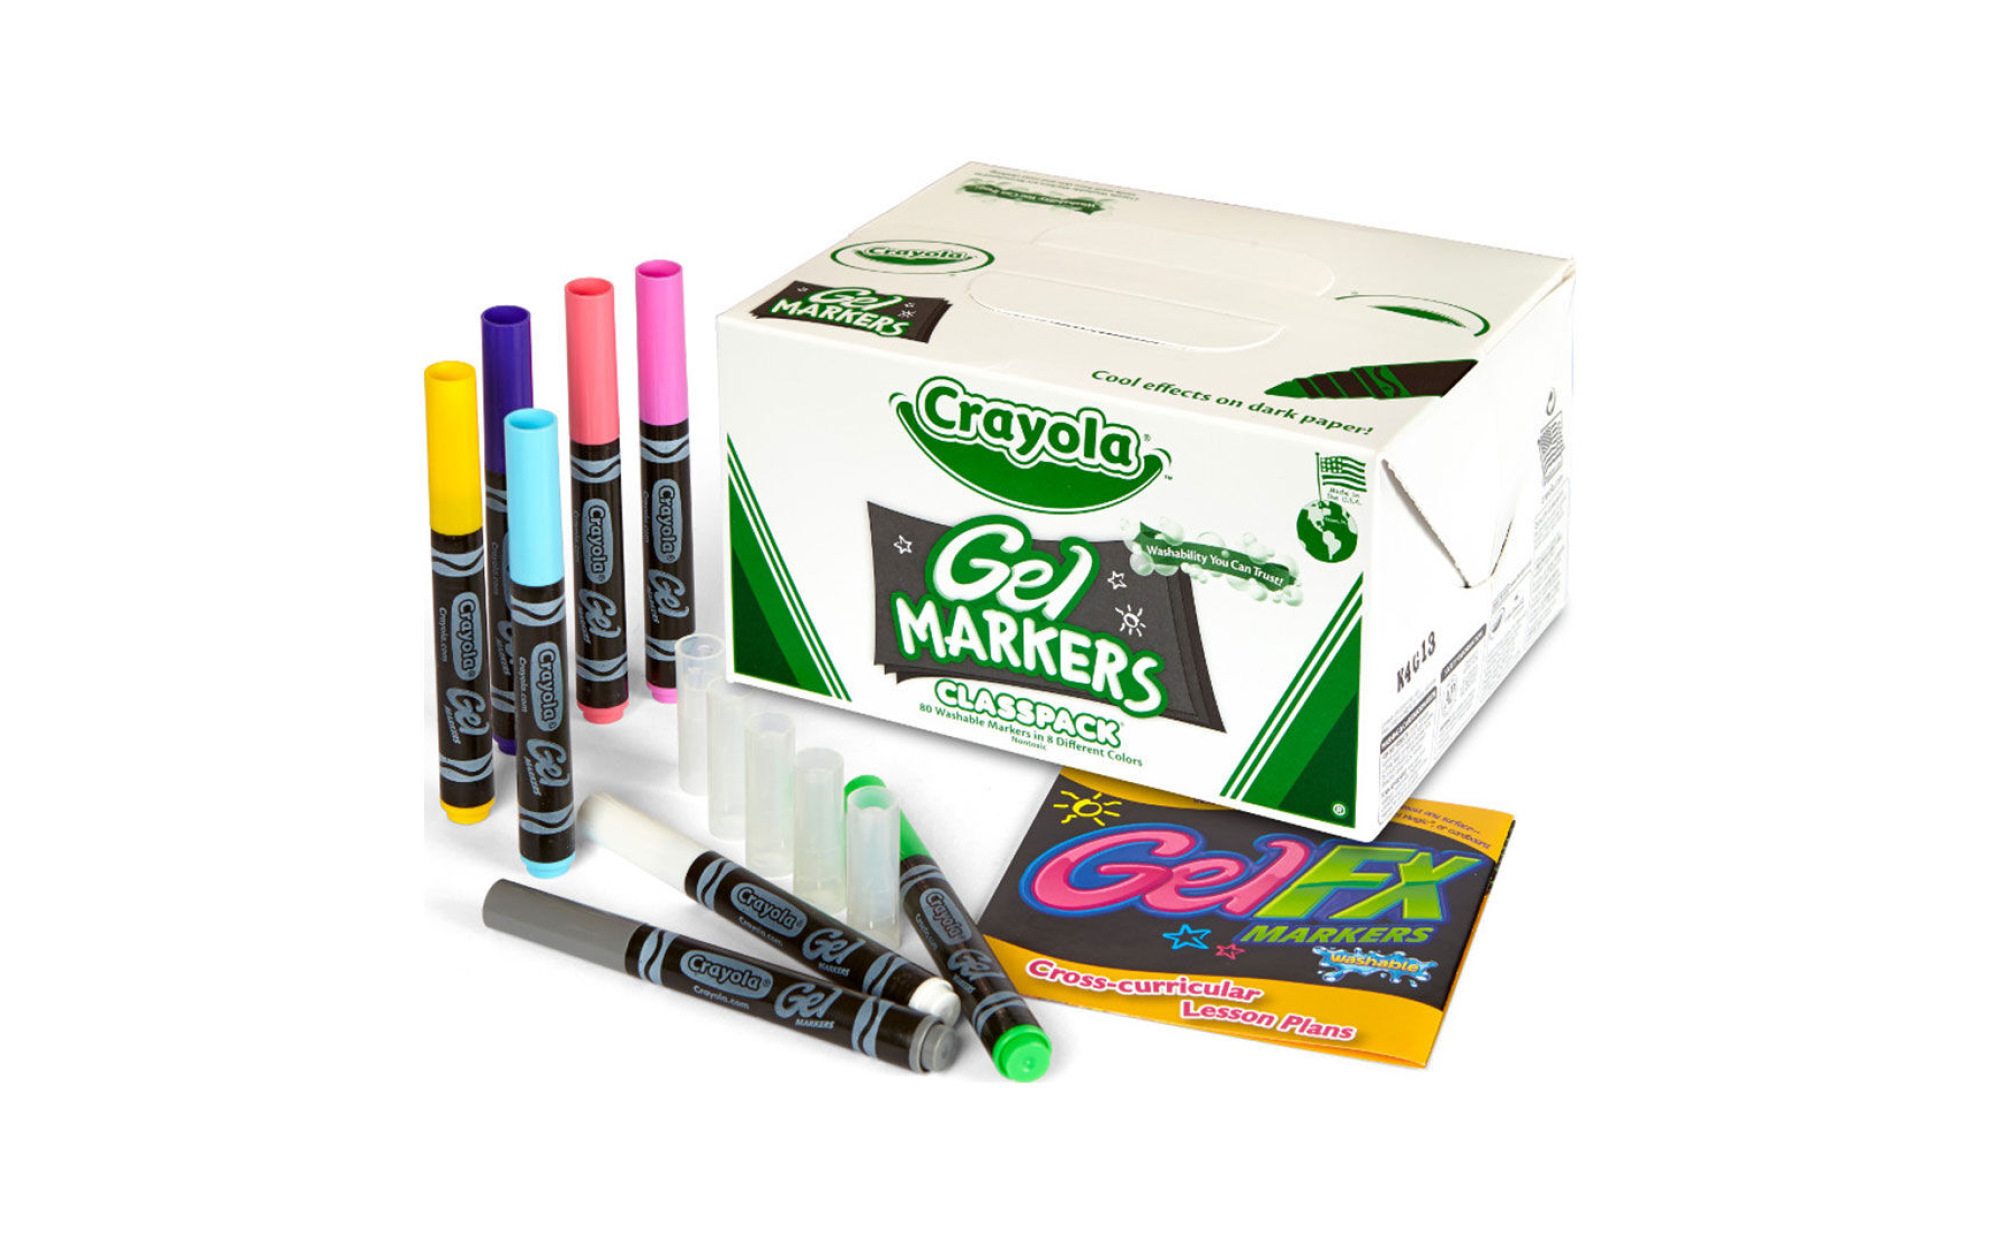 Crayola Ultra Clean Washable Markers Classpack (200 Count), Bulk